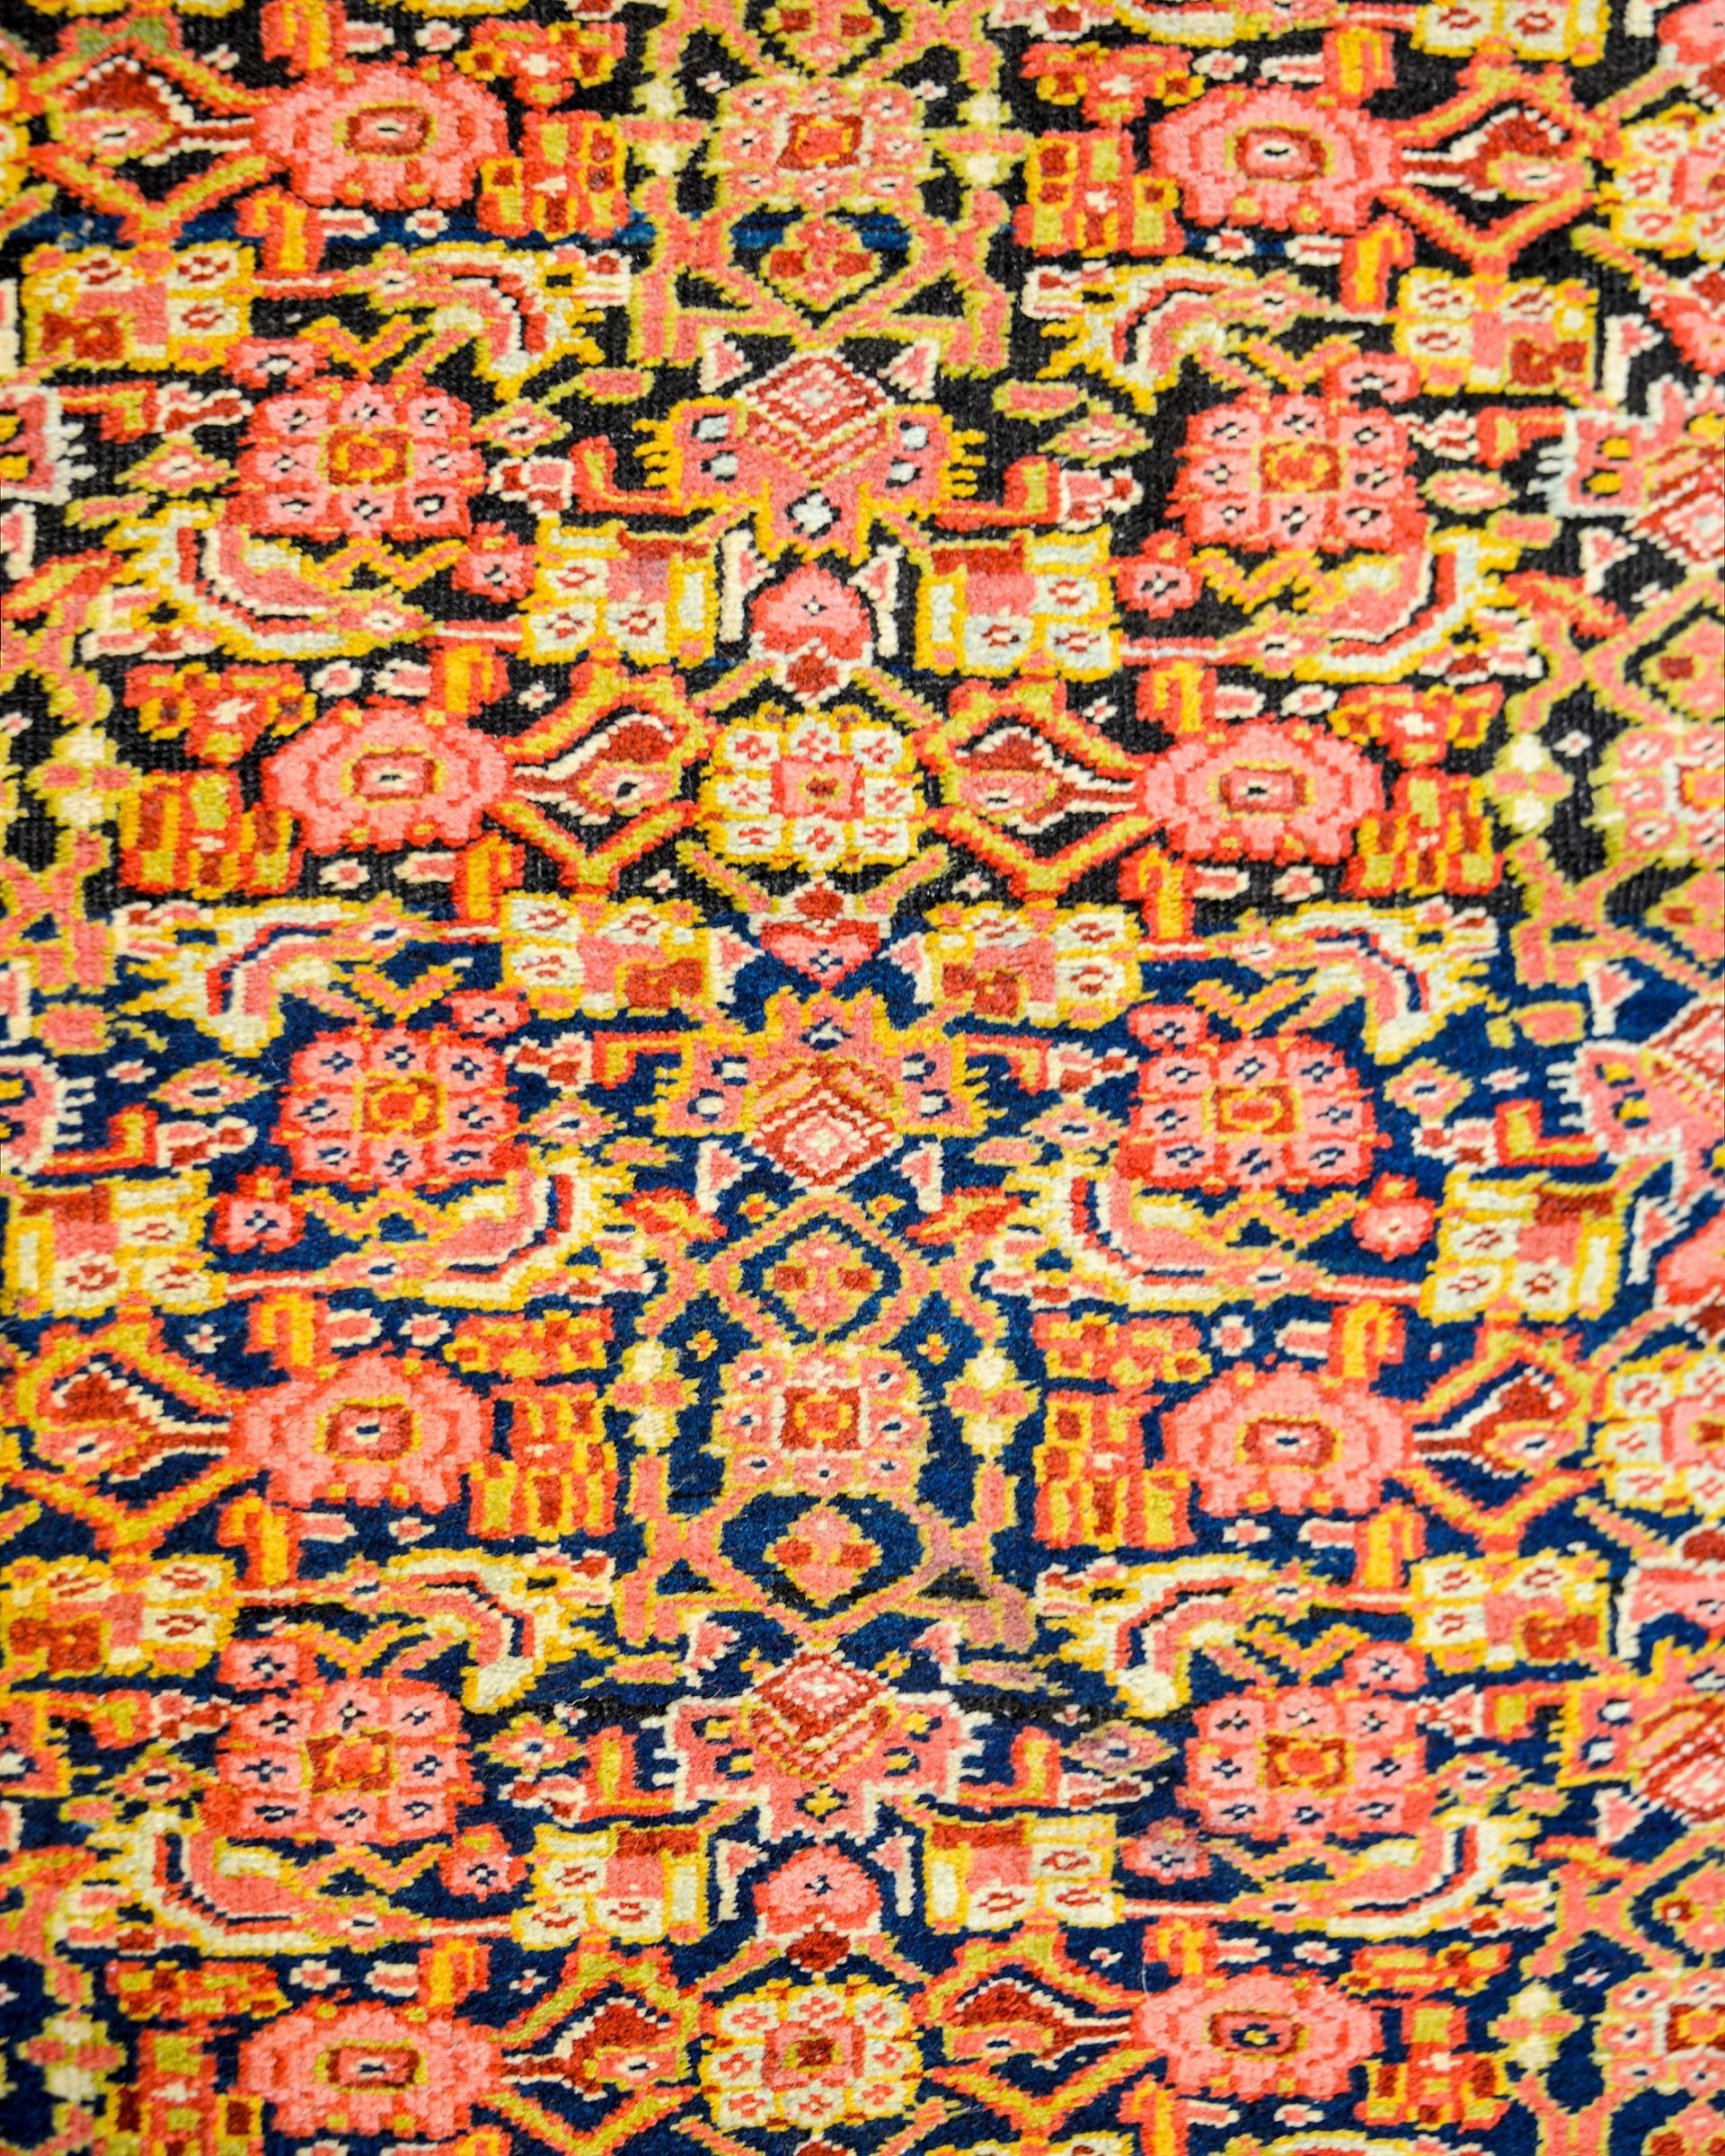 A wonderful early 20th century Persian Bidjar rug with an all-over lattice floral pattern woven in crimson, pink, gold, and indigo, on a beautiful indigo background. The border is amazing, composed of multiple floral patterned stripes.